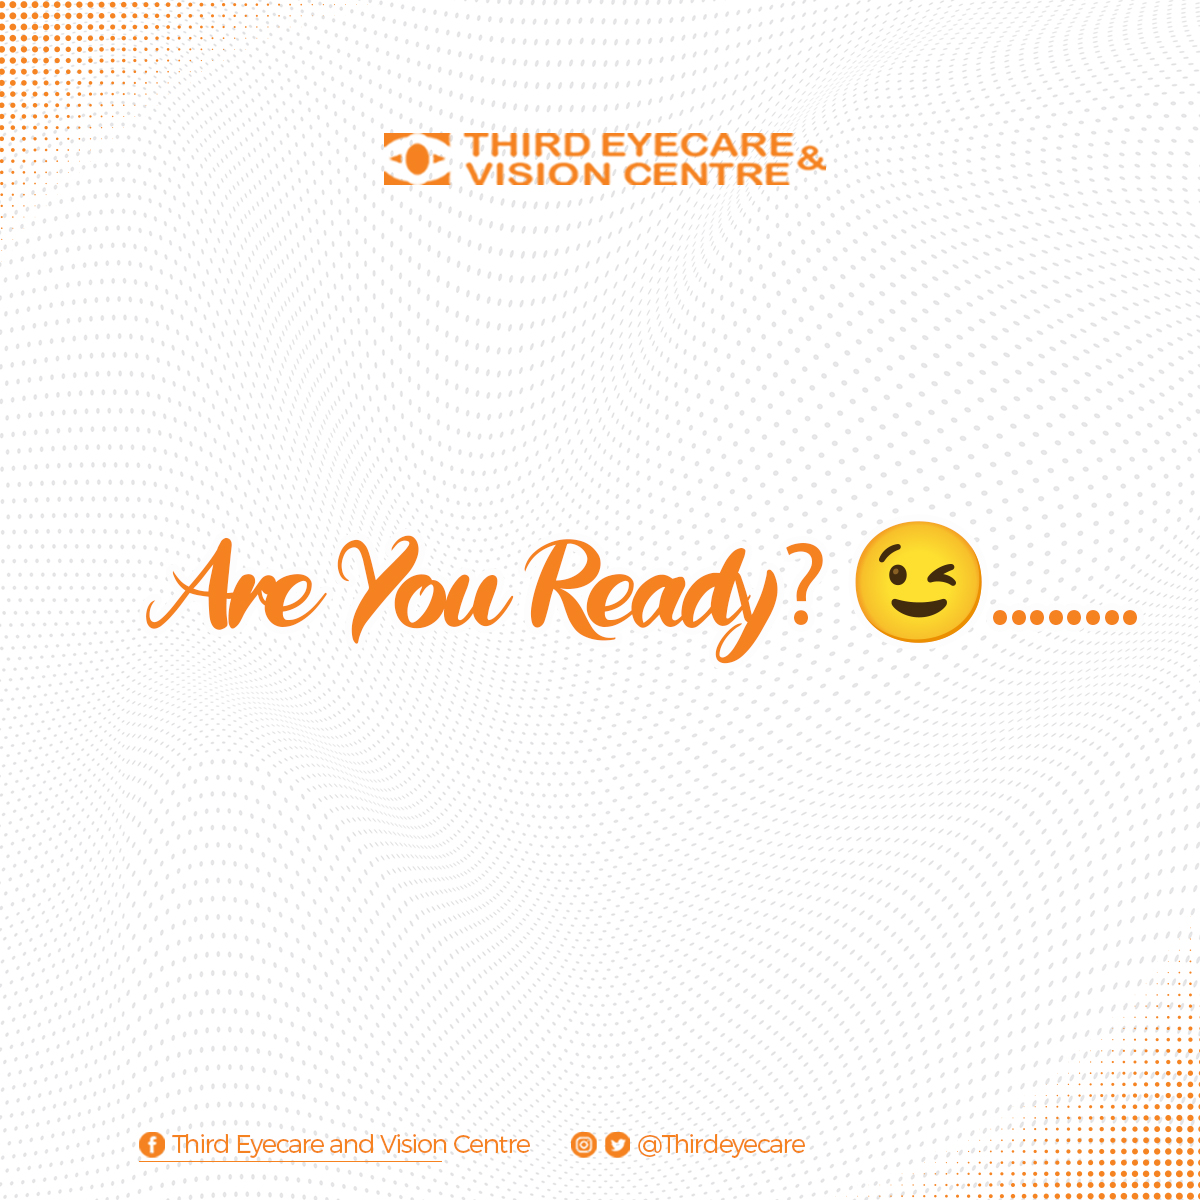 Something new is coming your way........

#thirdeyecareandvisioncentre #optometrist #eyecareprofessionals #quality #eyeweargh #eyecaresolutions #lenscleaning #doublevision #prescriptionglasses #healthinsurance #seegood